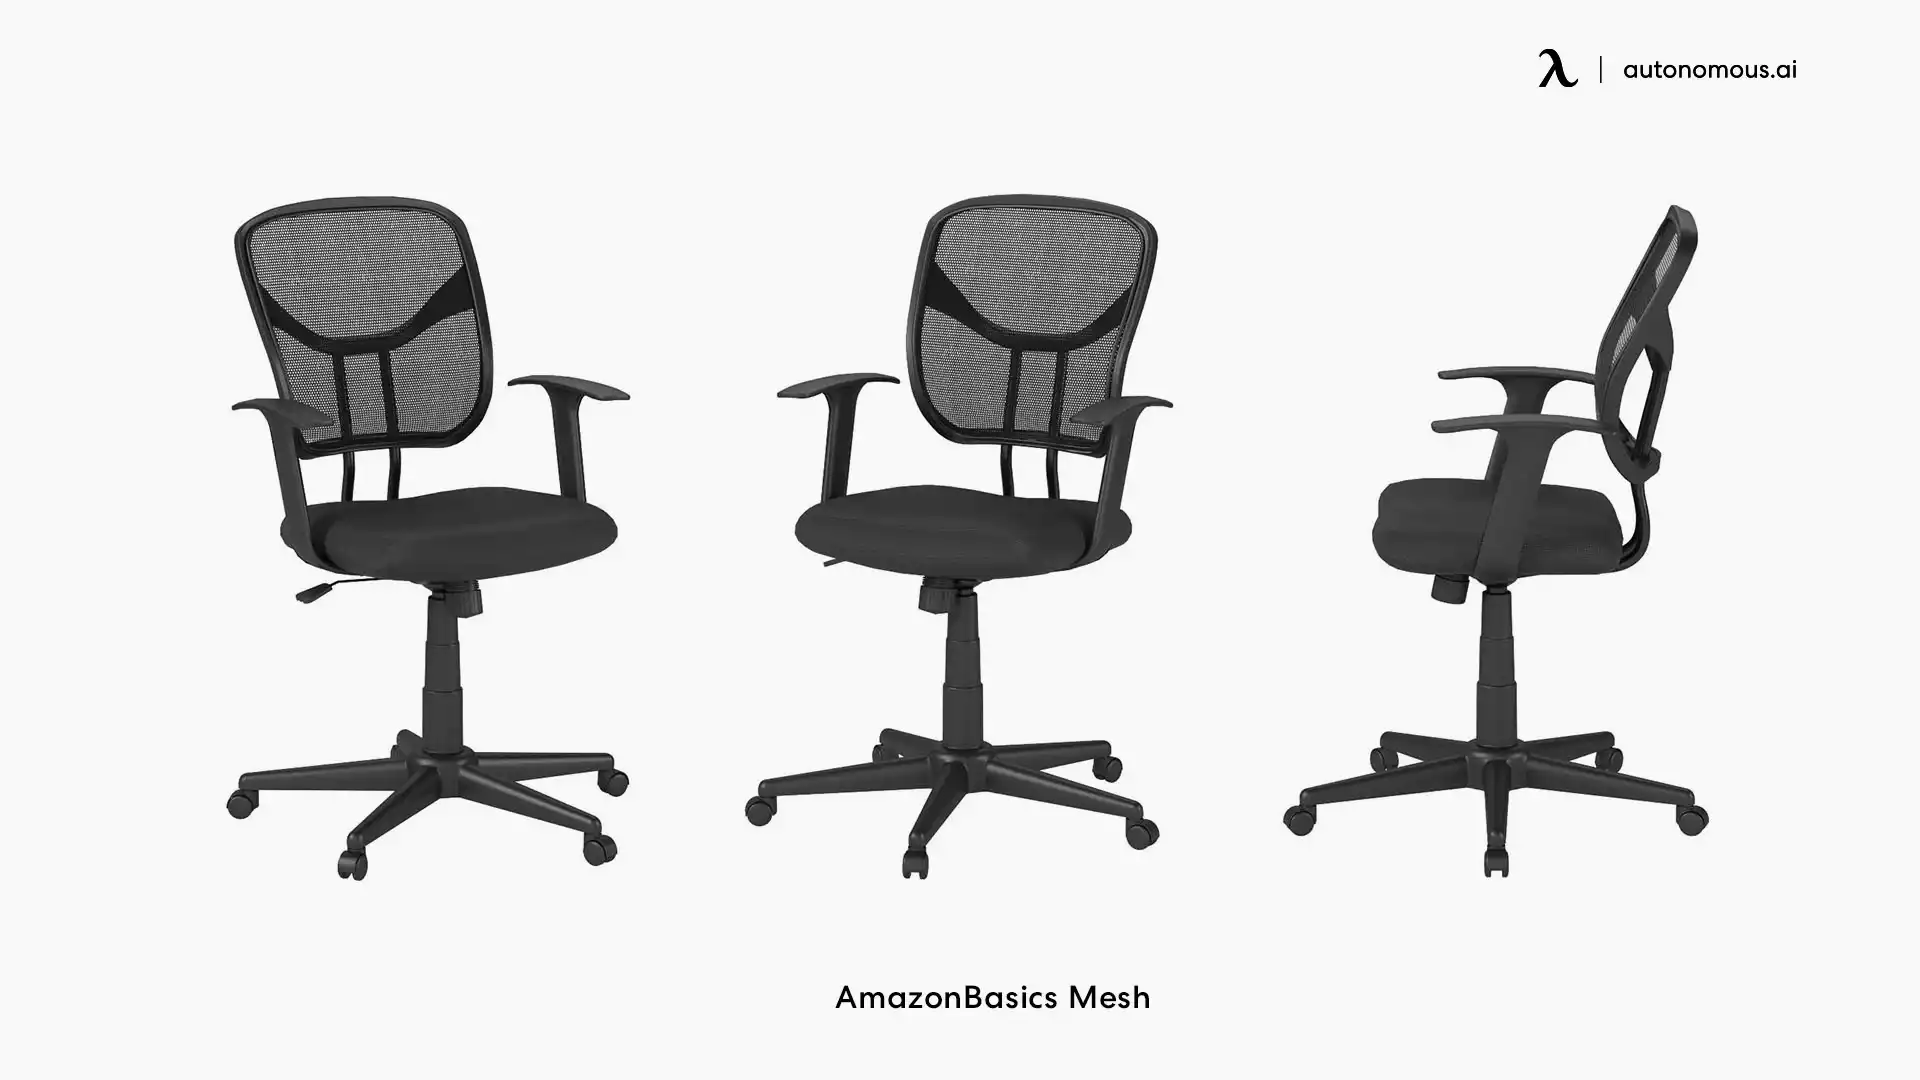 Low-Back Office Desk Chair from AmazonBasics